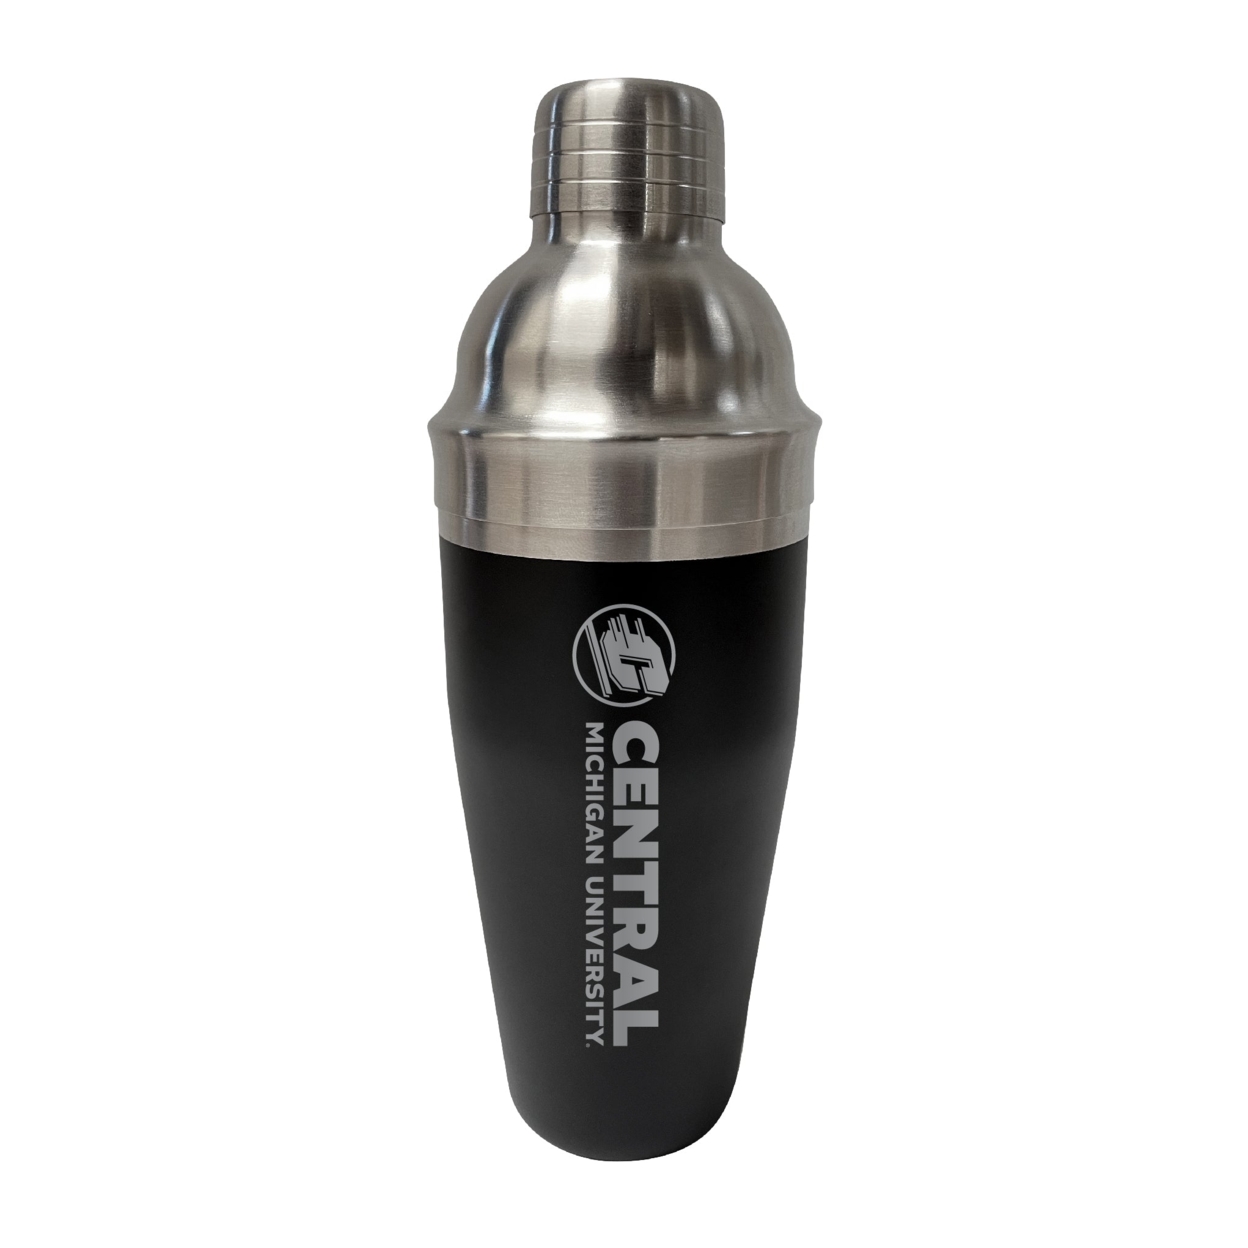 Central Michigan University 24 Oz Stainless Steel Cocktail Shaker